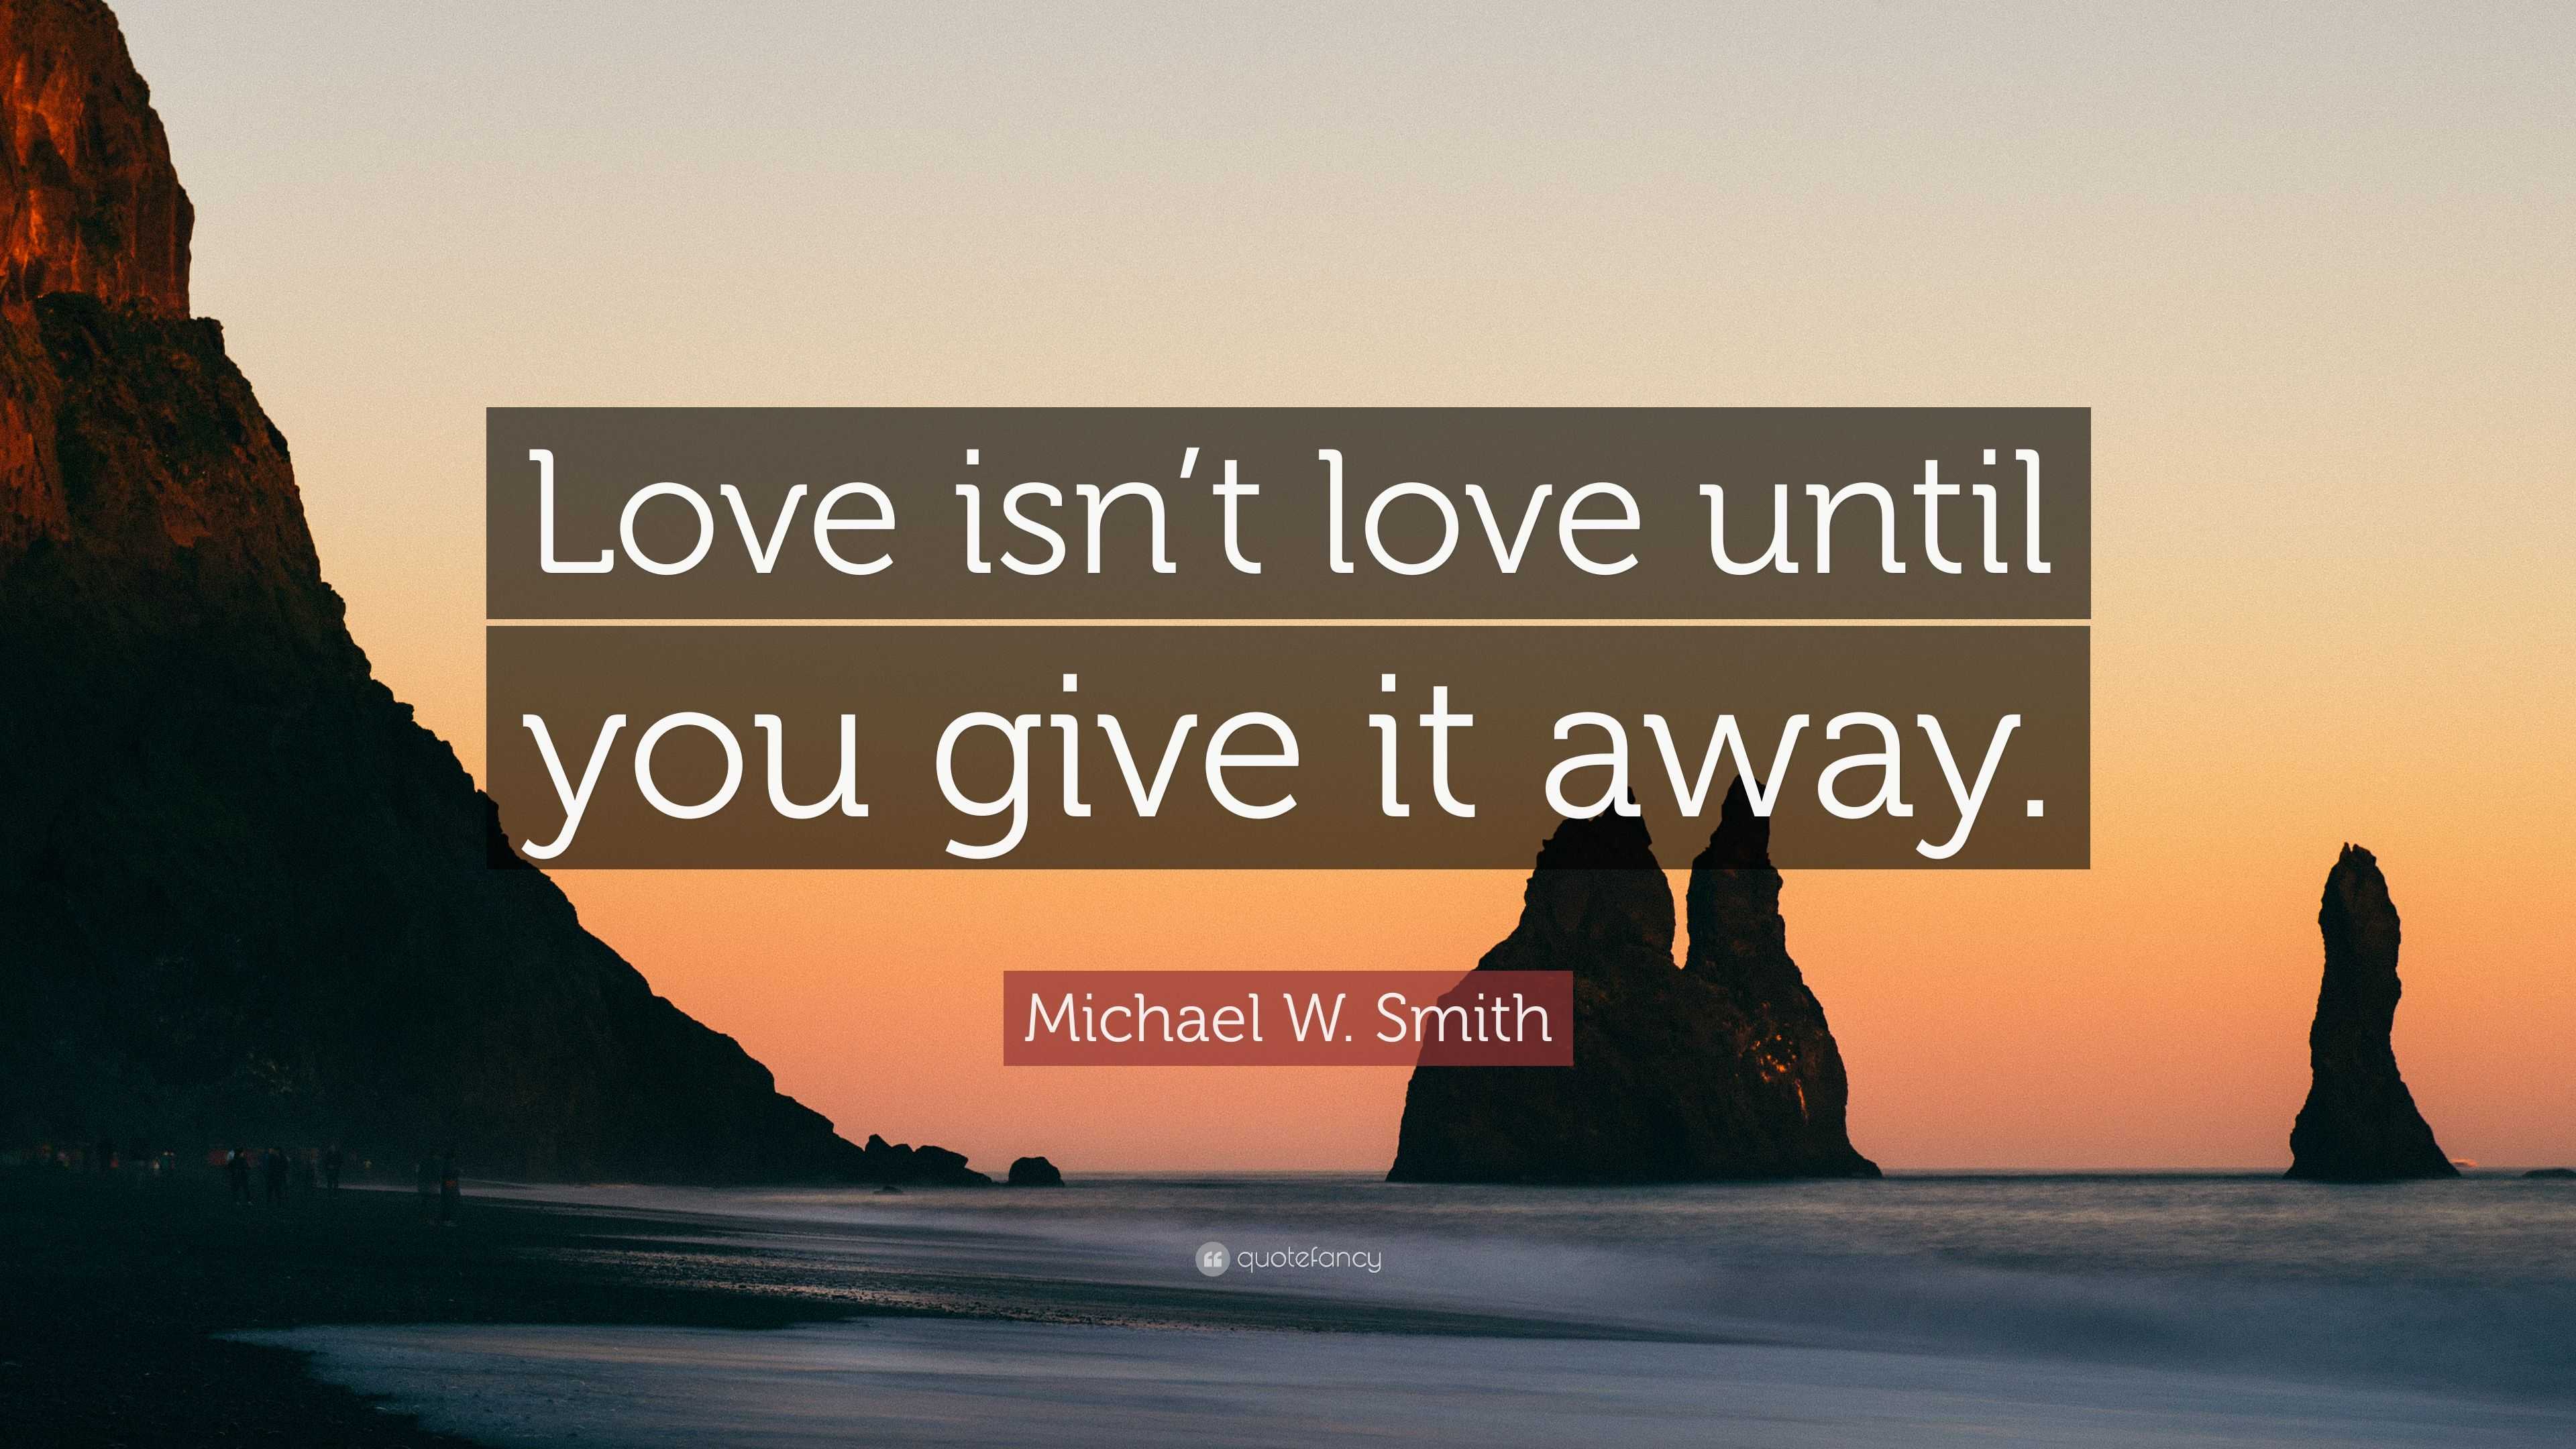 Michael W Smith Quote “Love isn t love until you give it